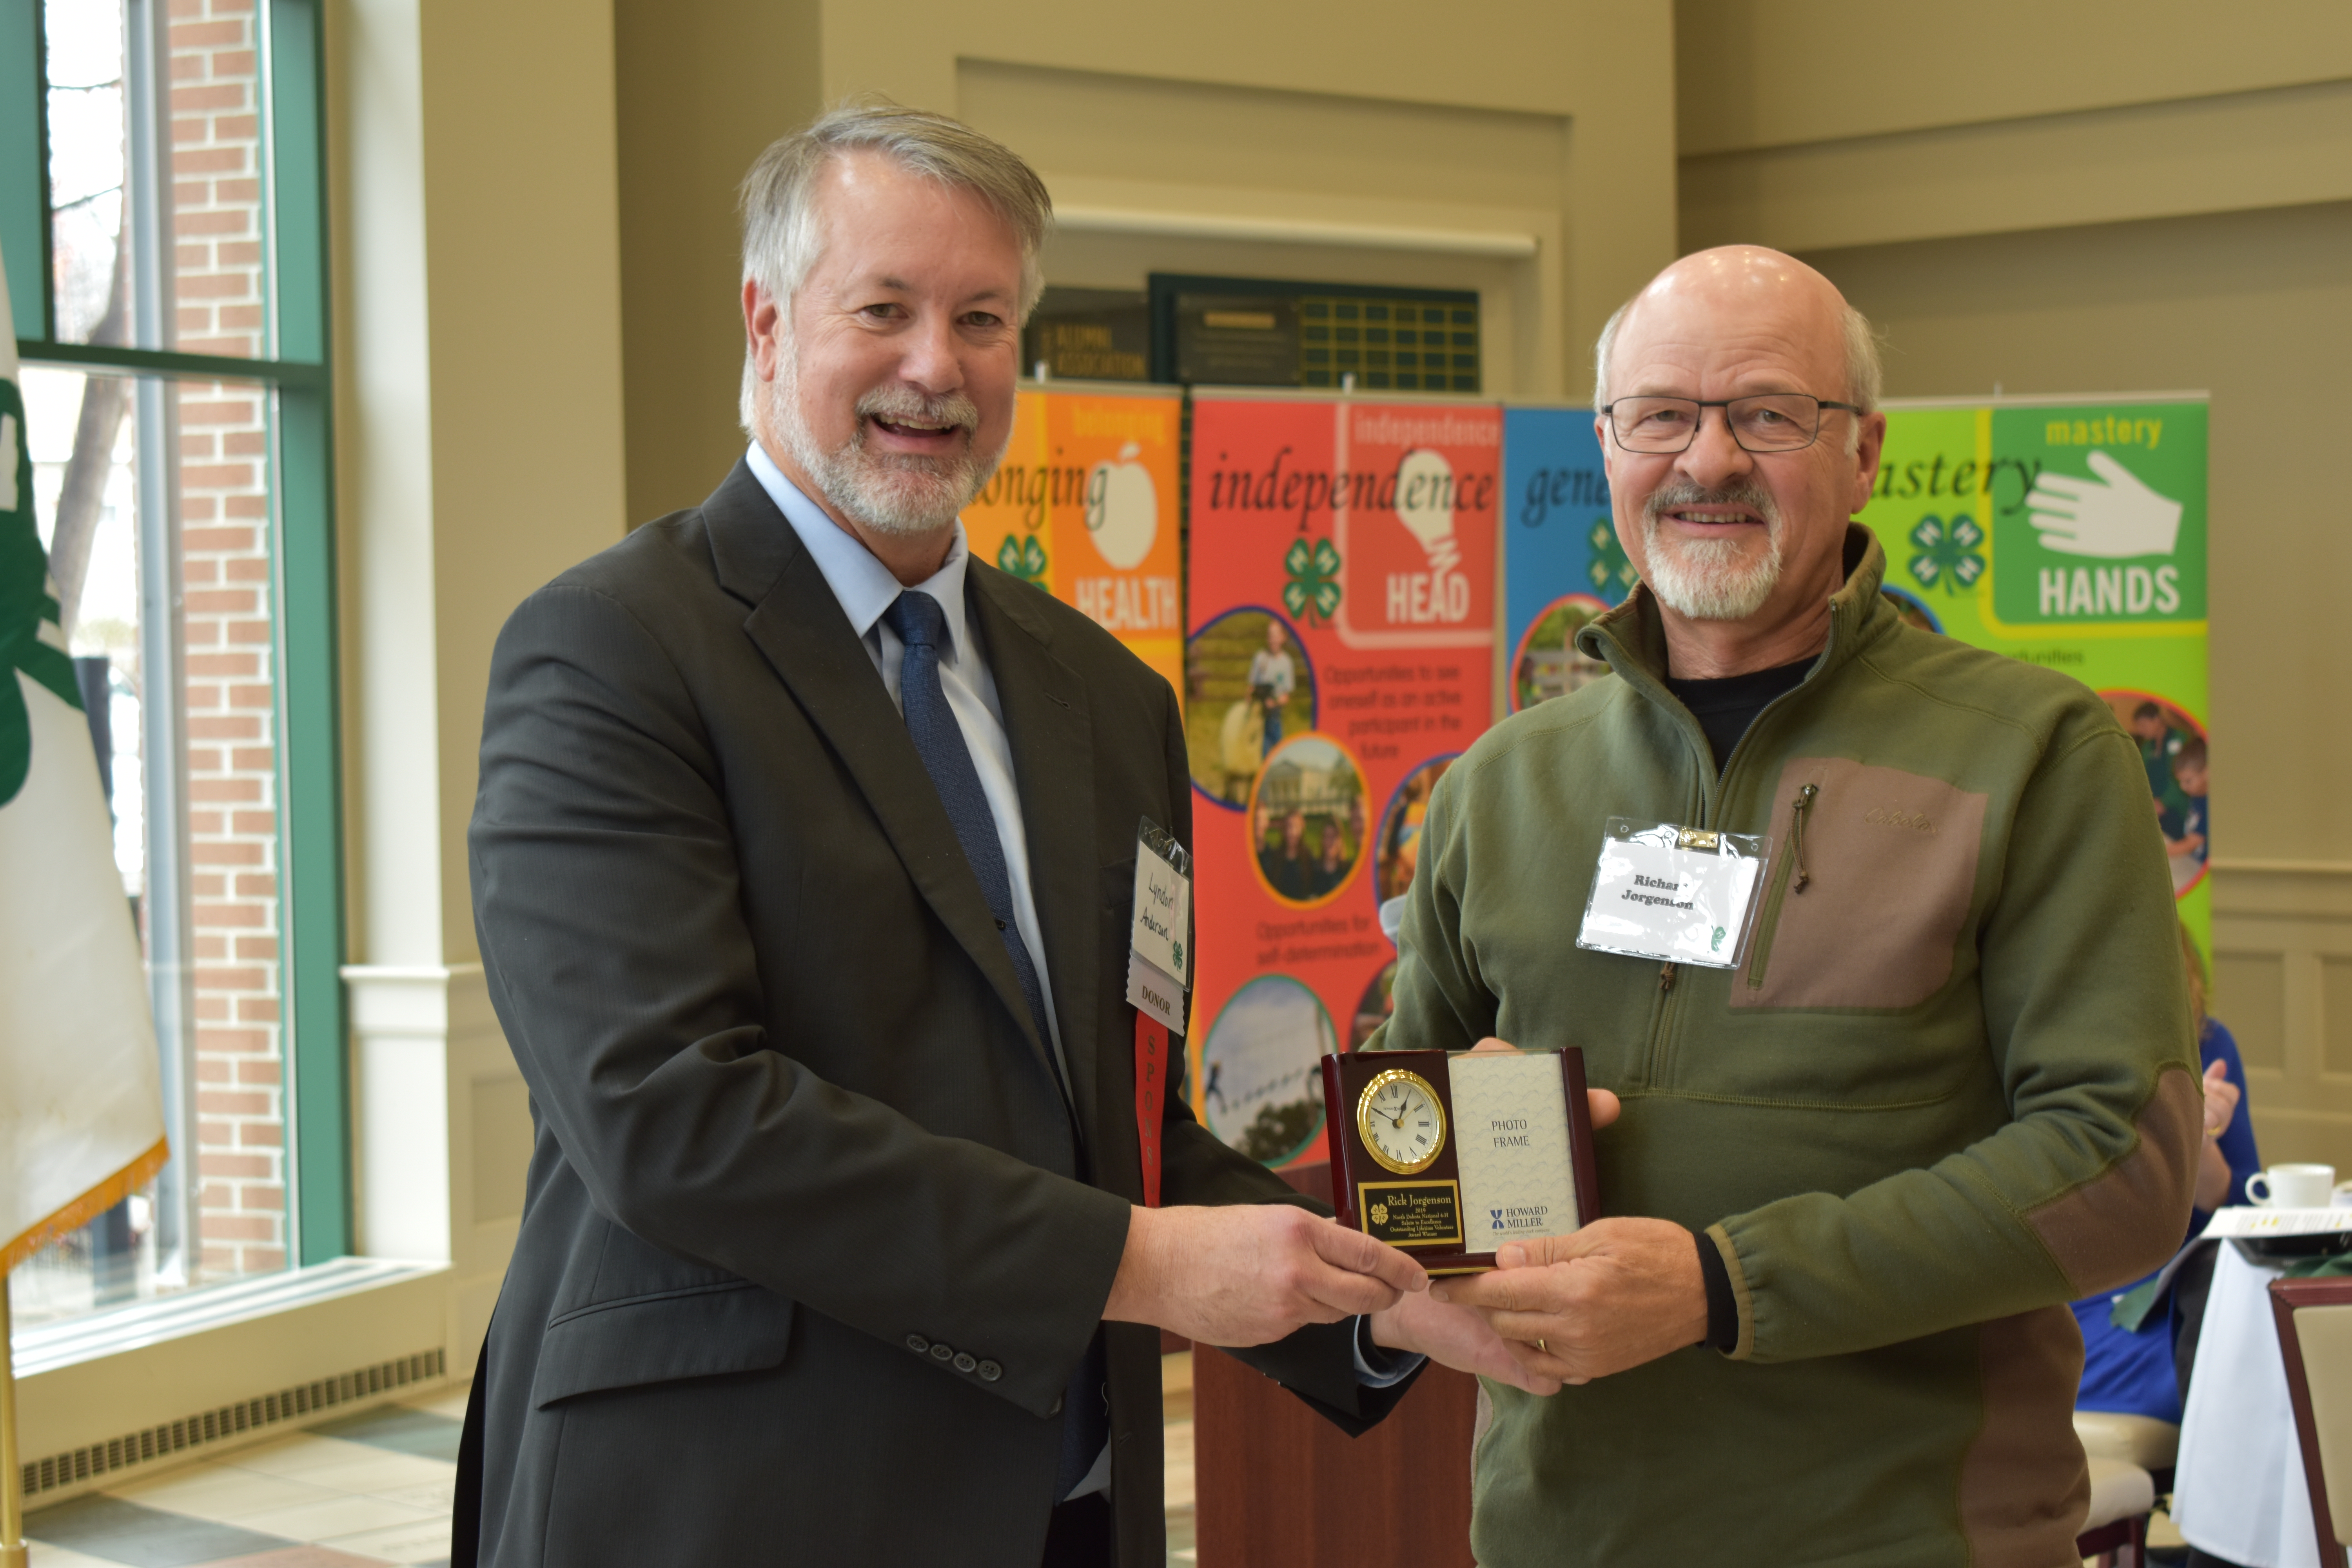 Rick Jorgenson, North Dakota’s Outstanding Lifetime 4-H Volunteer for 2019 (right) receives a gift from Lyndon Anderson, a North Dakota 4-H Foundation board member. (NDSU photo)